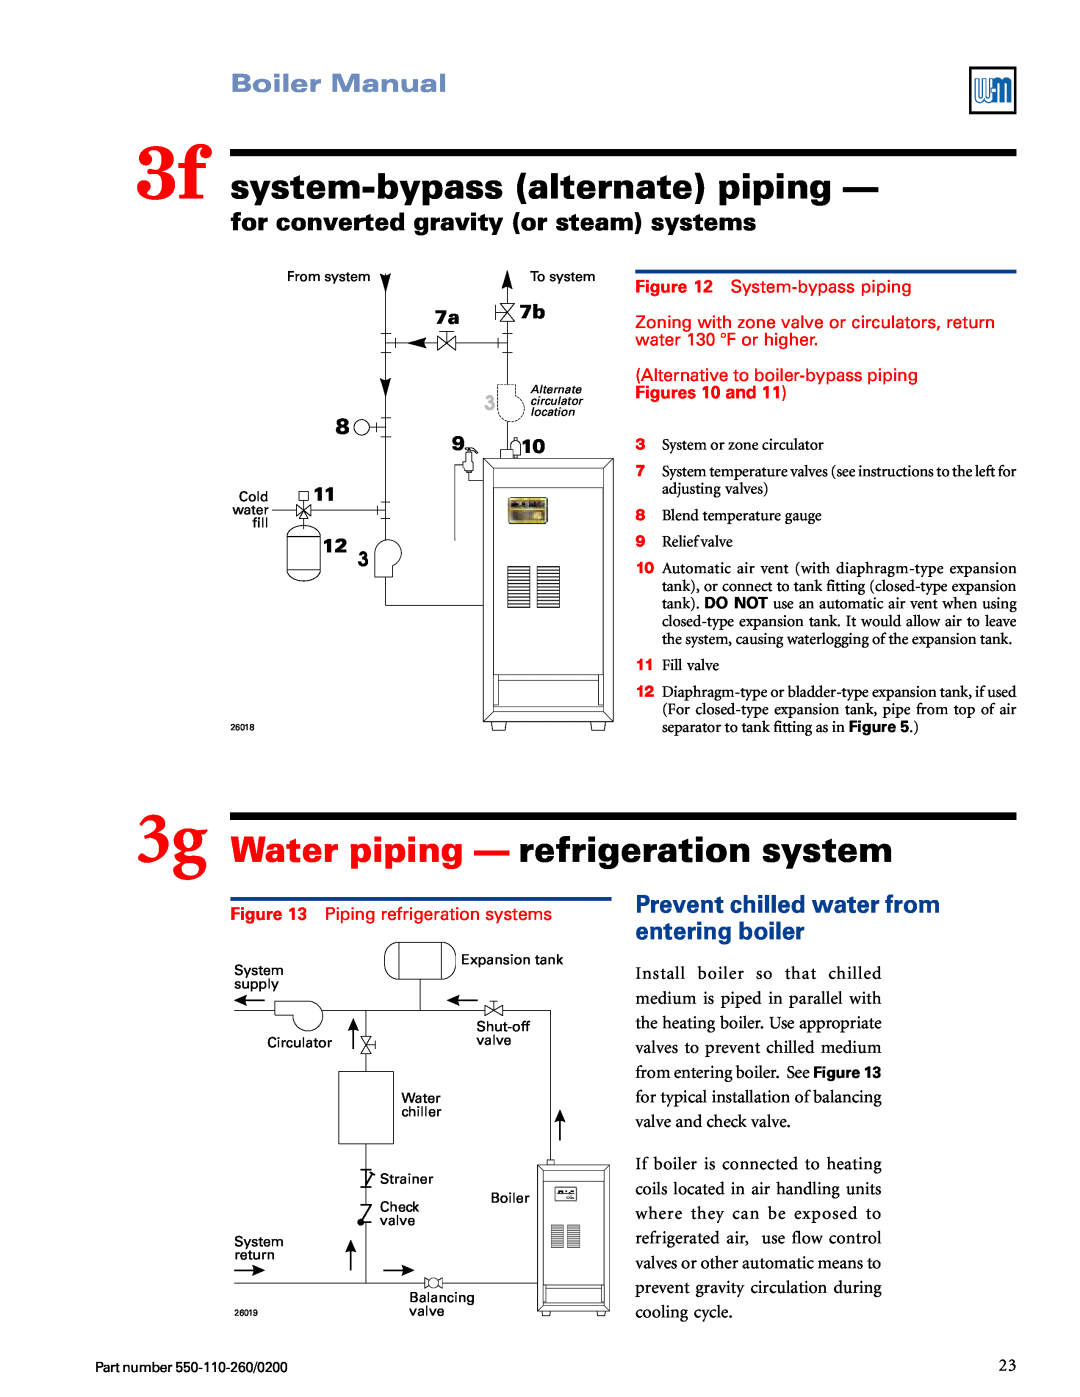 Weil-McLain 550-110-260/02002 3f system-bypassalternate piping, 3g Water piping — refrigeration system, Boiler Manual 